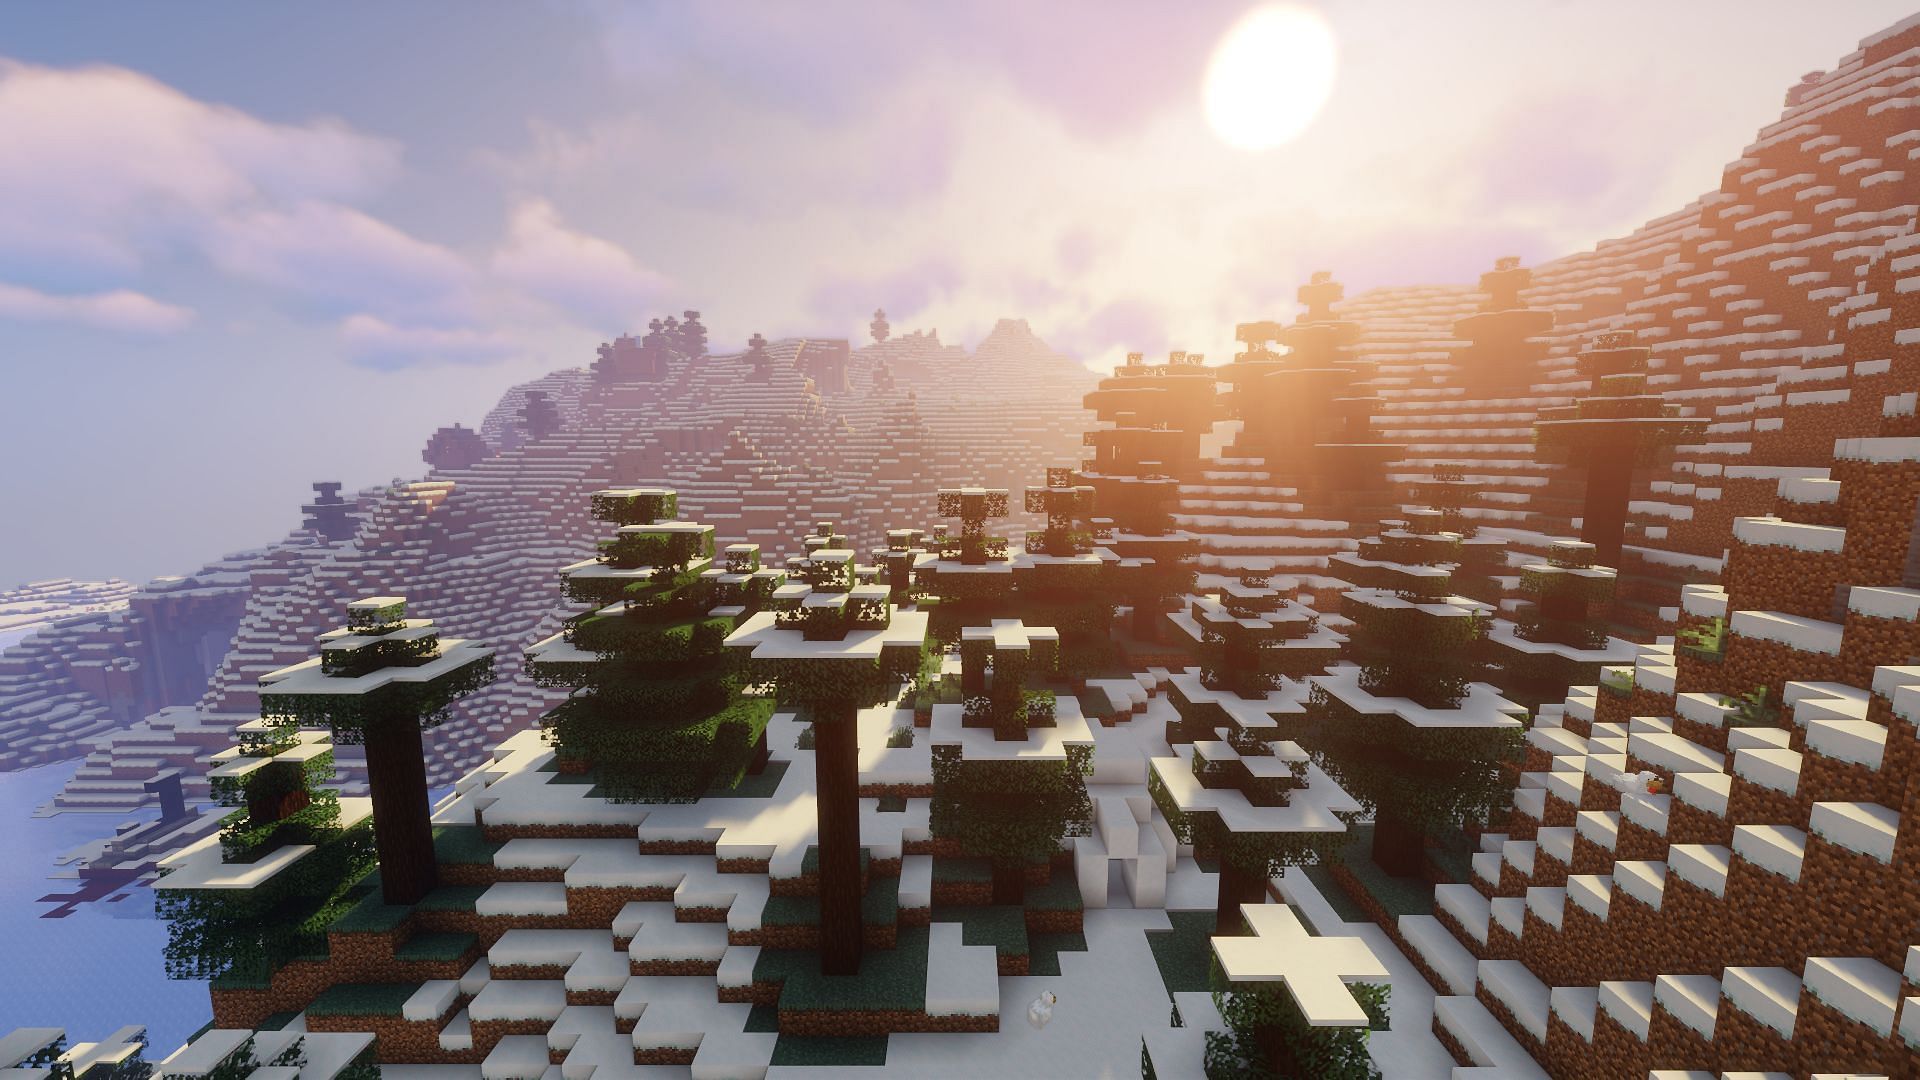 An example of an igloo with a village in the background (Image via Minecraft)